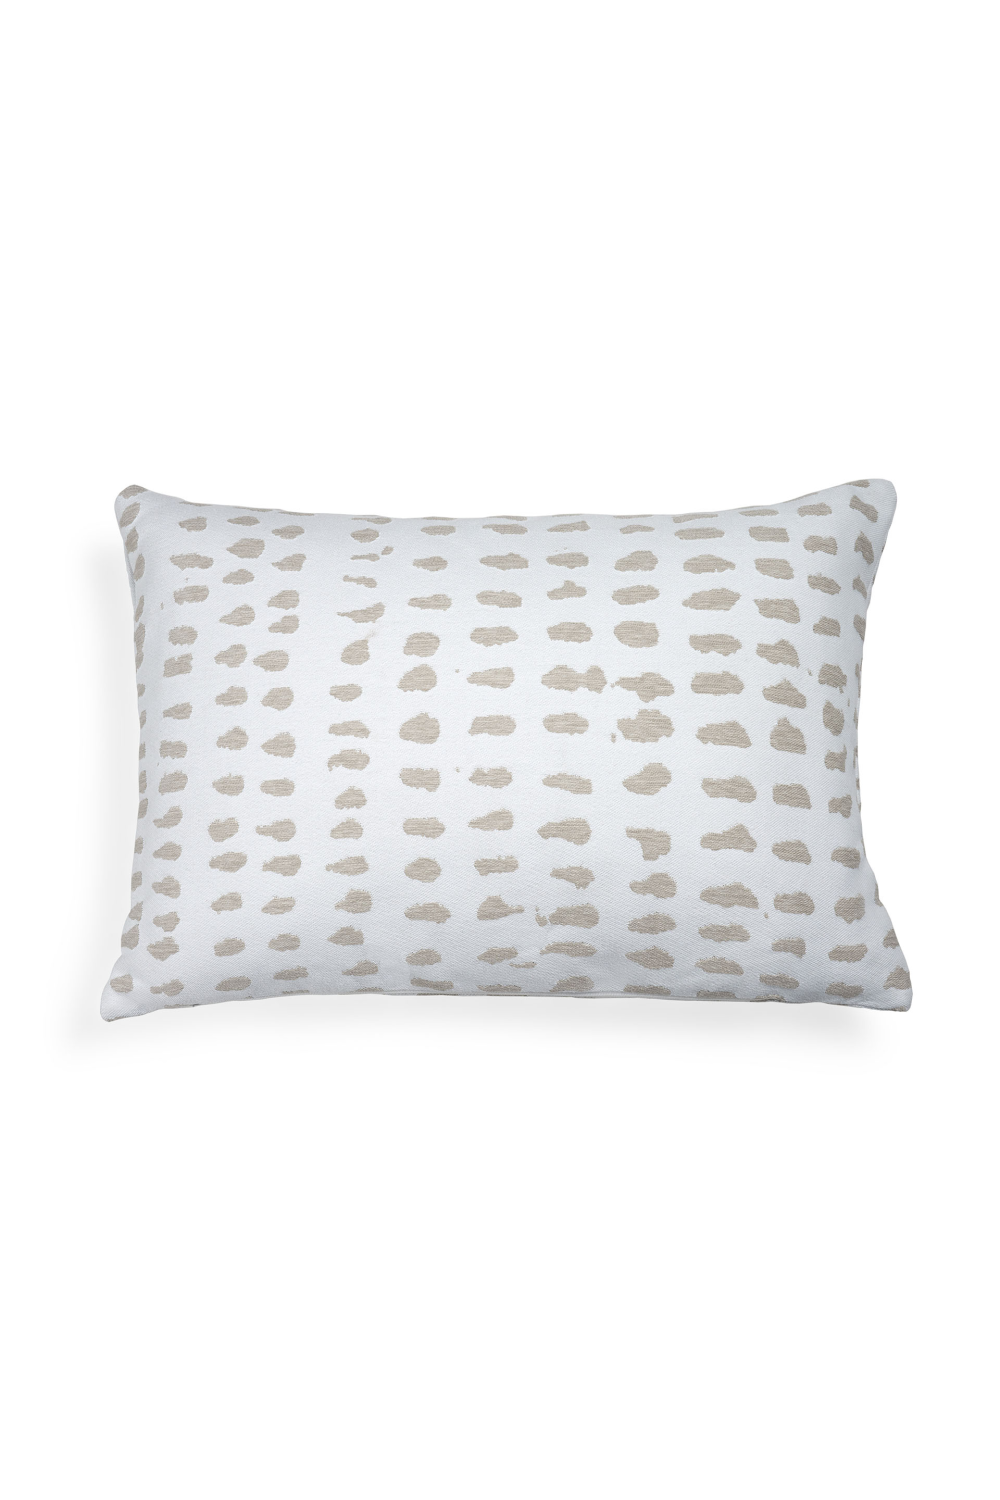 Printed Outdoor Cushions (2) | Ethnicraft White | OROA